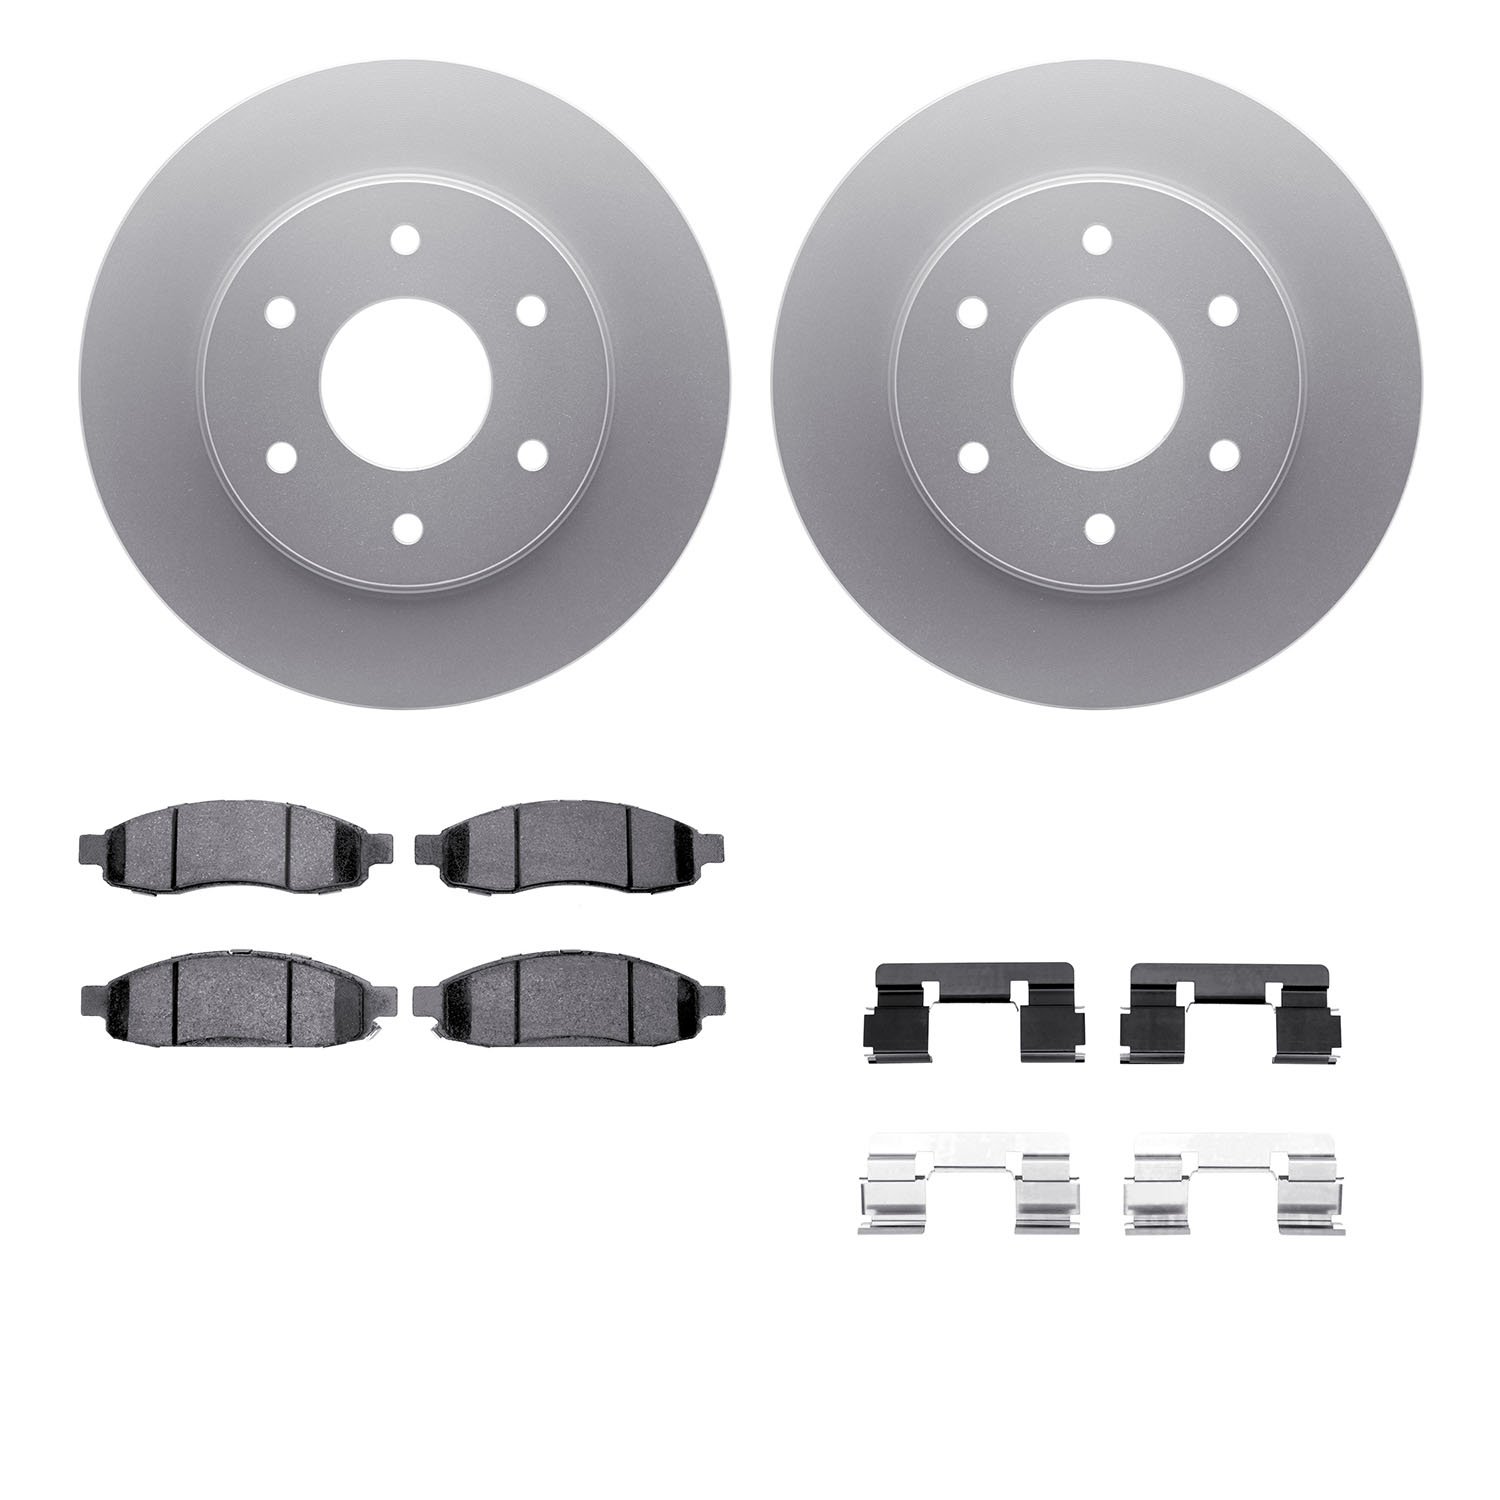 4412-67002 Geospec Brake Rotors with Ultimate-Duty Brake Pads & Hardware, 2004-2005 Infiniti/Nissan, Position: Front